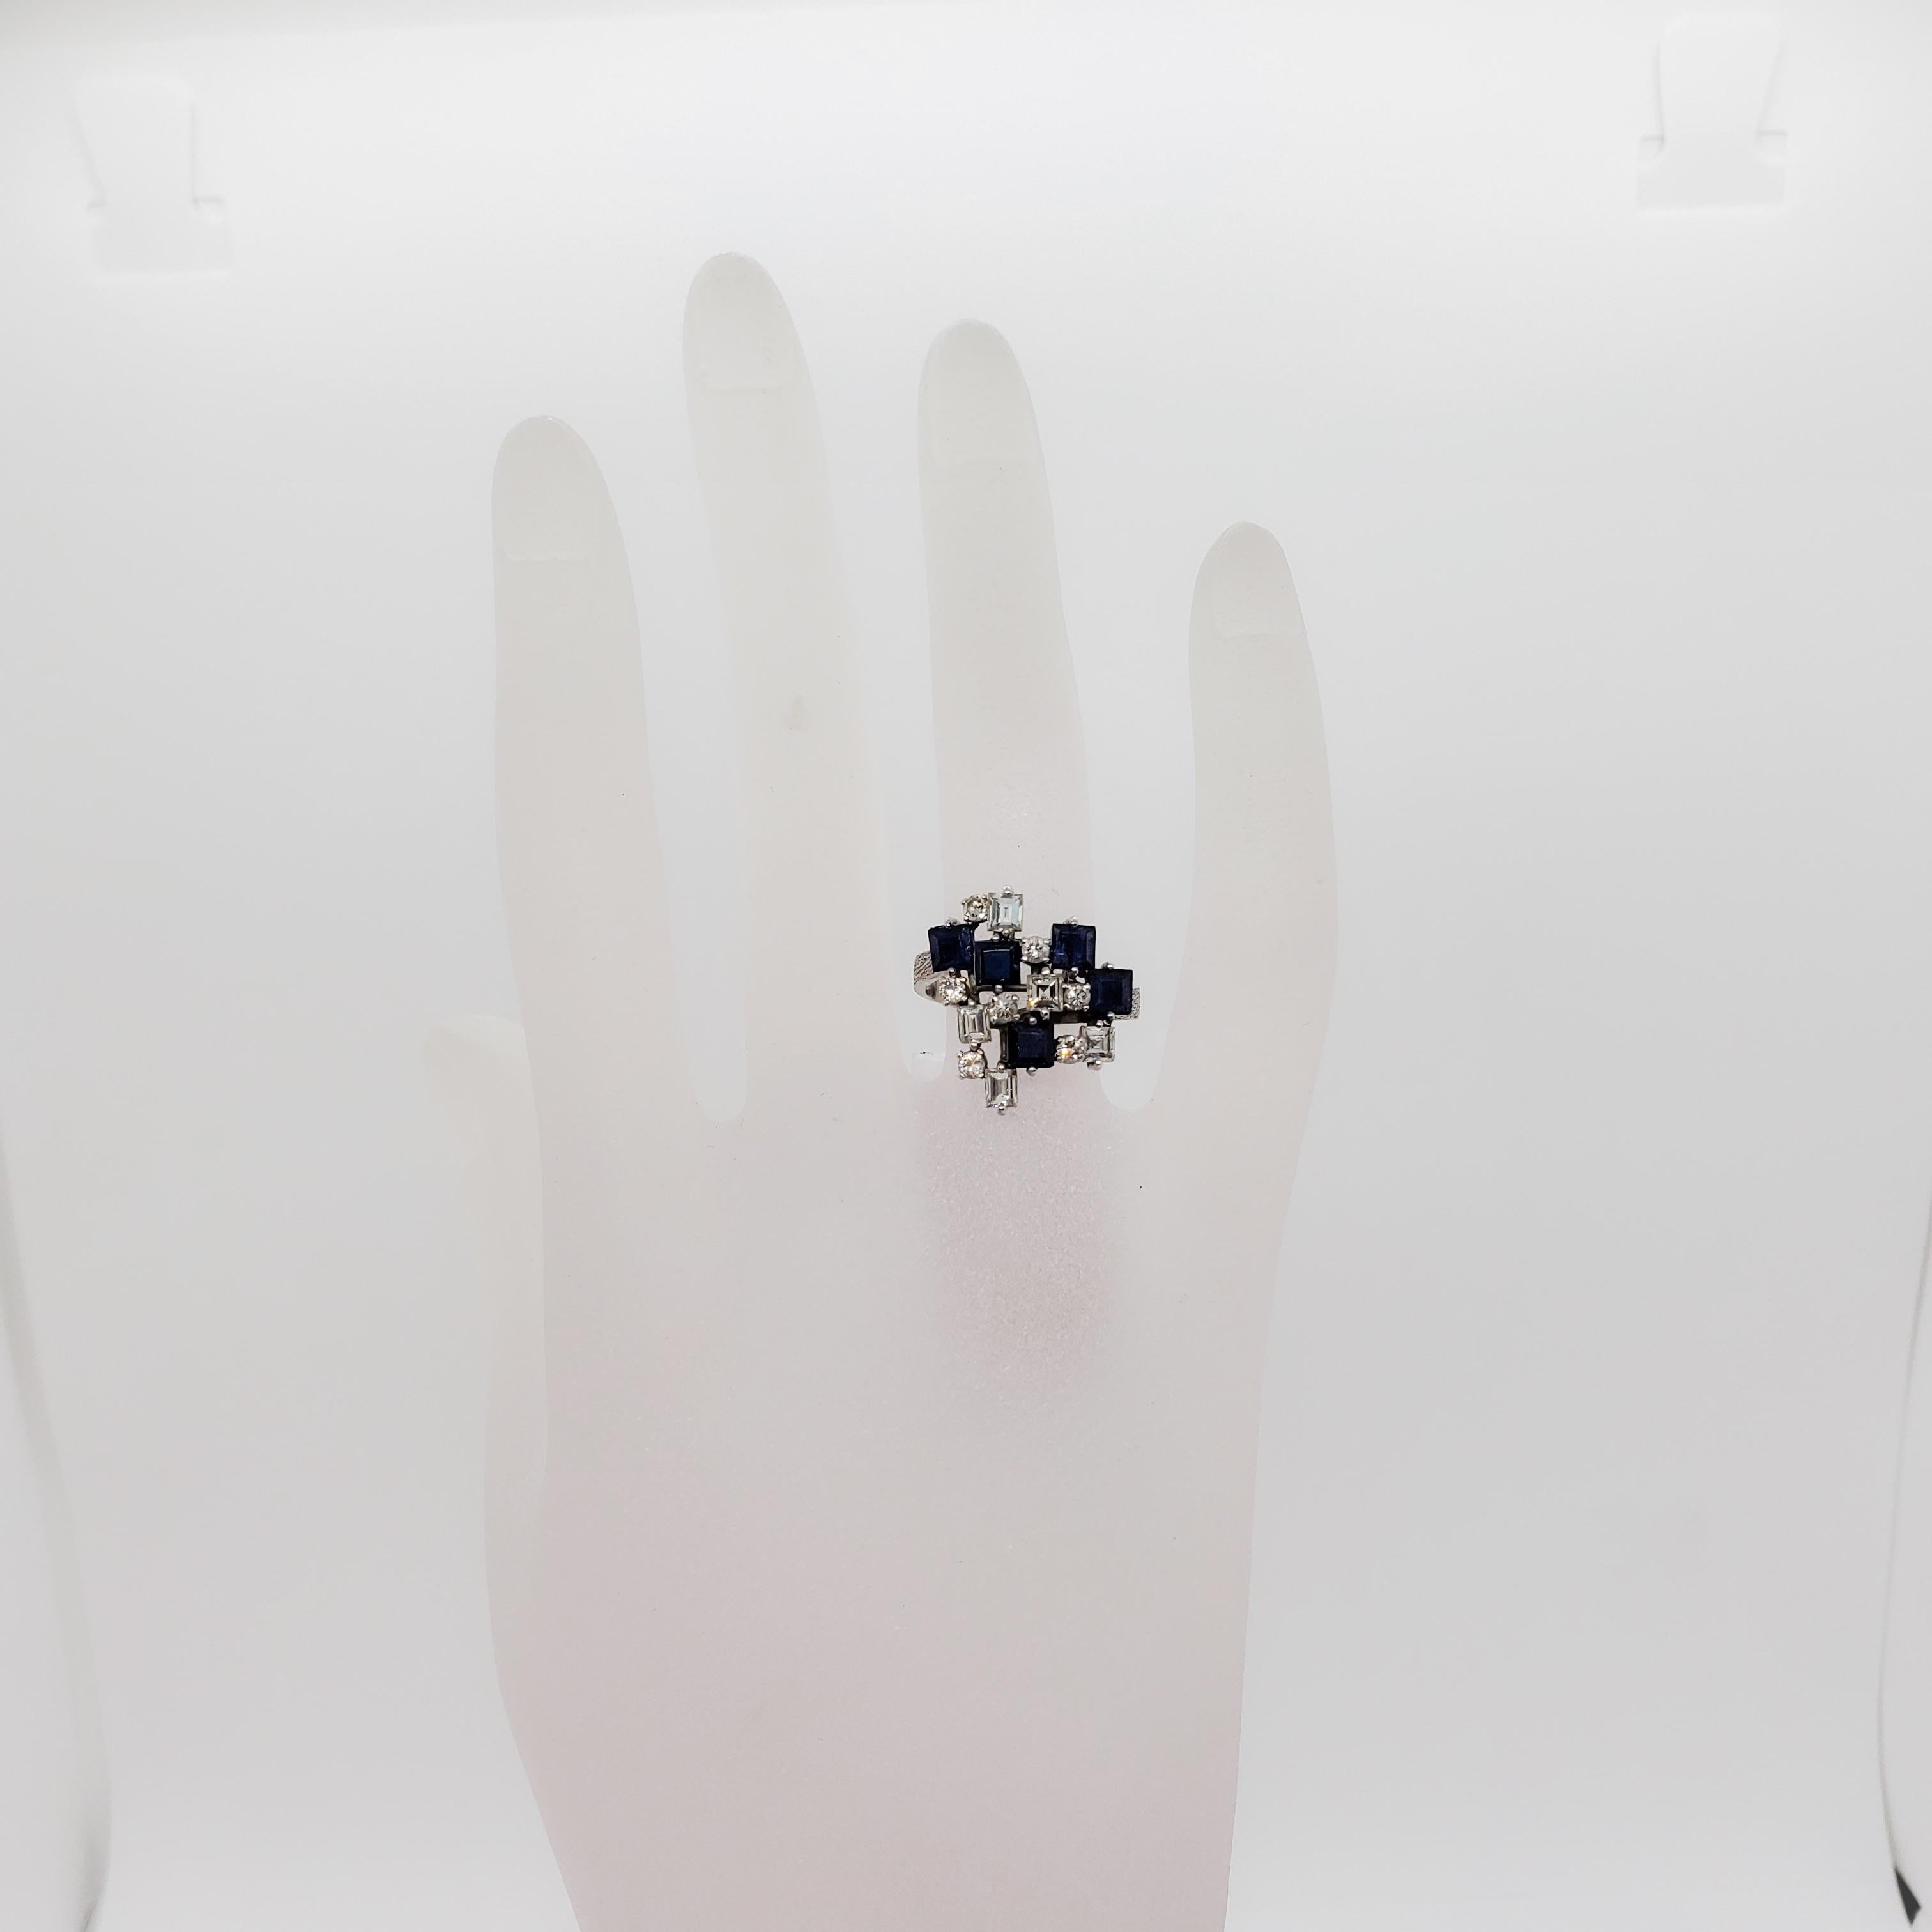 Fun and spunky platinum ring featuring 1.73 ct. of dark blue sapphire squares with 1.00 ct. of good quality white diamond rounds. Handmade mounting in size 7.25. Perfect for everyday or a special occasion.